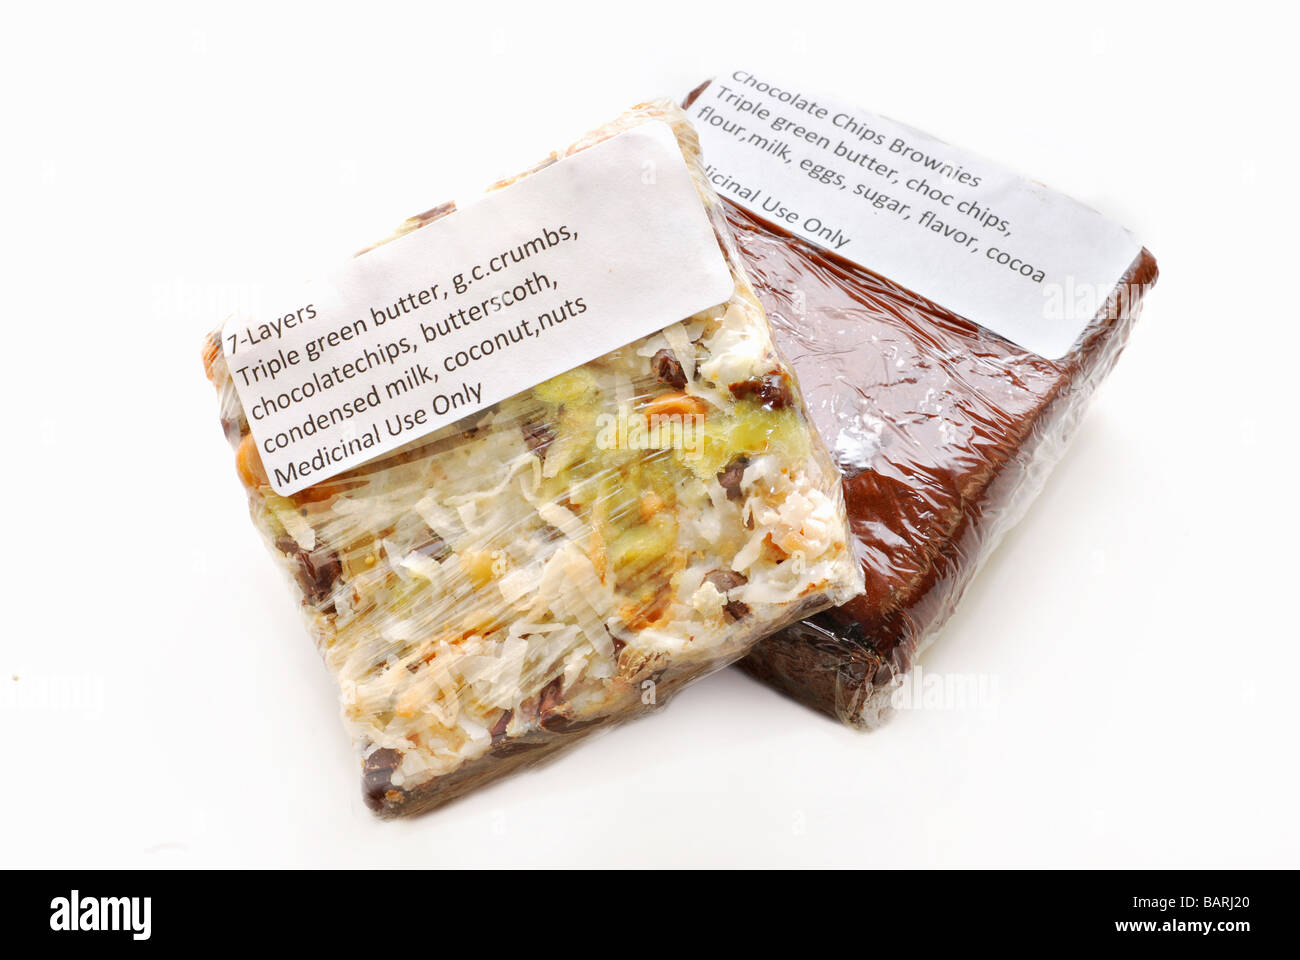 Brownie and 7 Layer Bar with green butter medical cannabis edibles Stock Photo